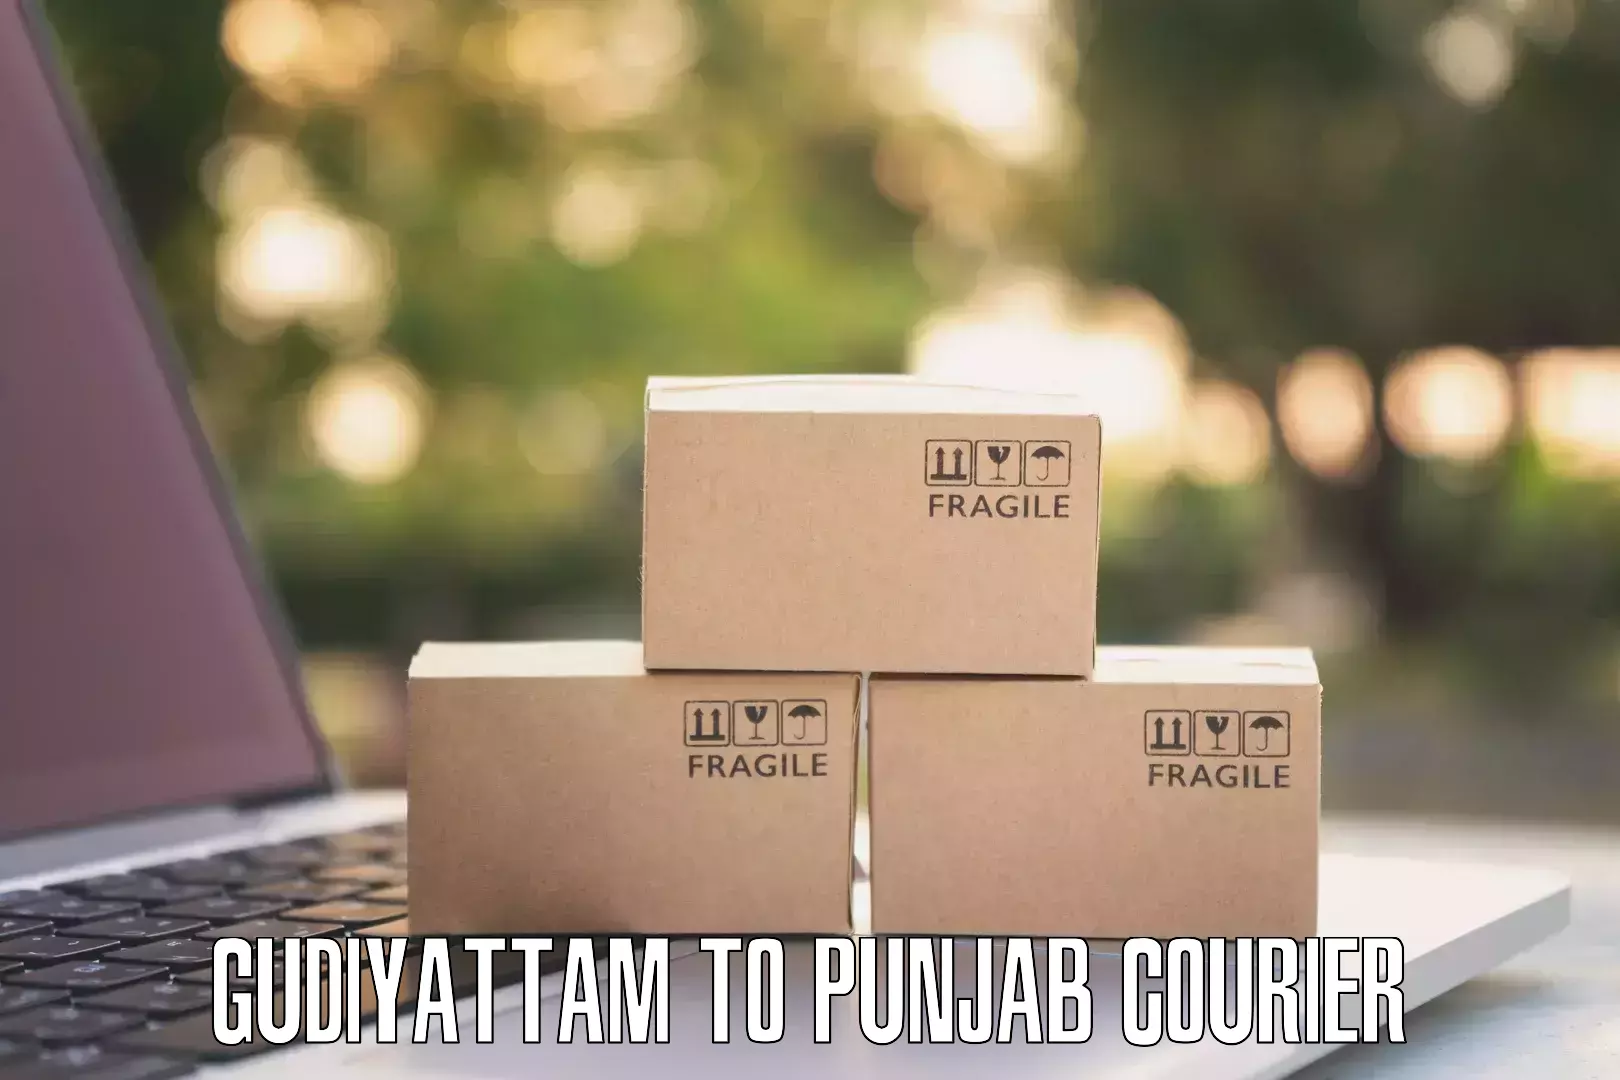 Express package handling Gudiyattam to Thapar Institute of Engineering and Technology Patiala